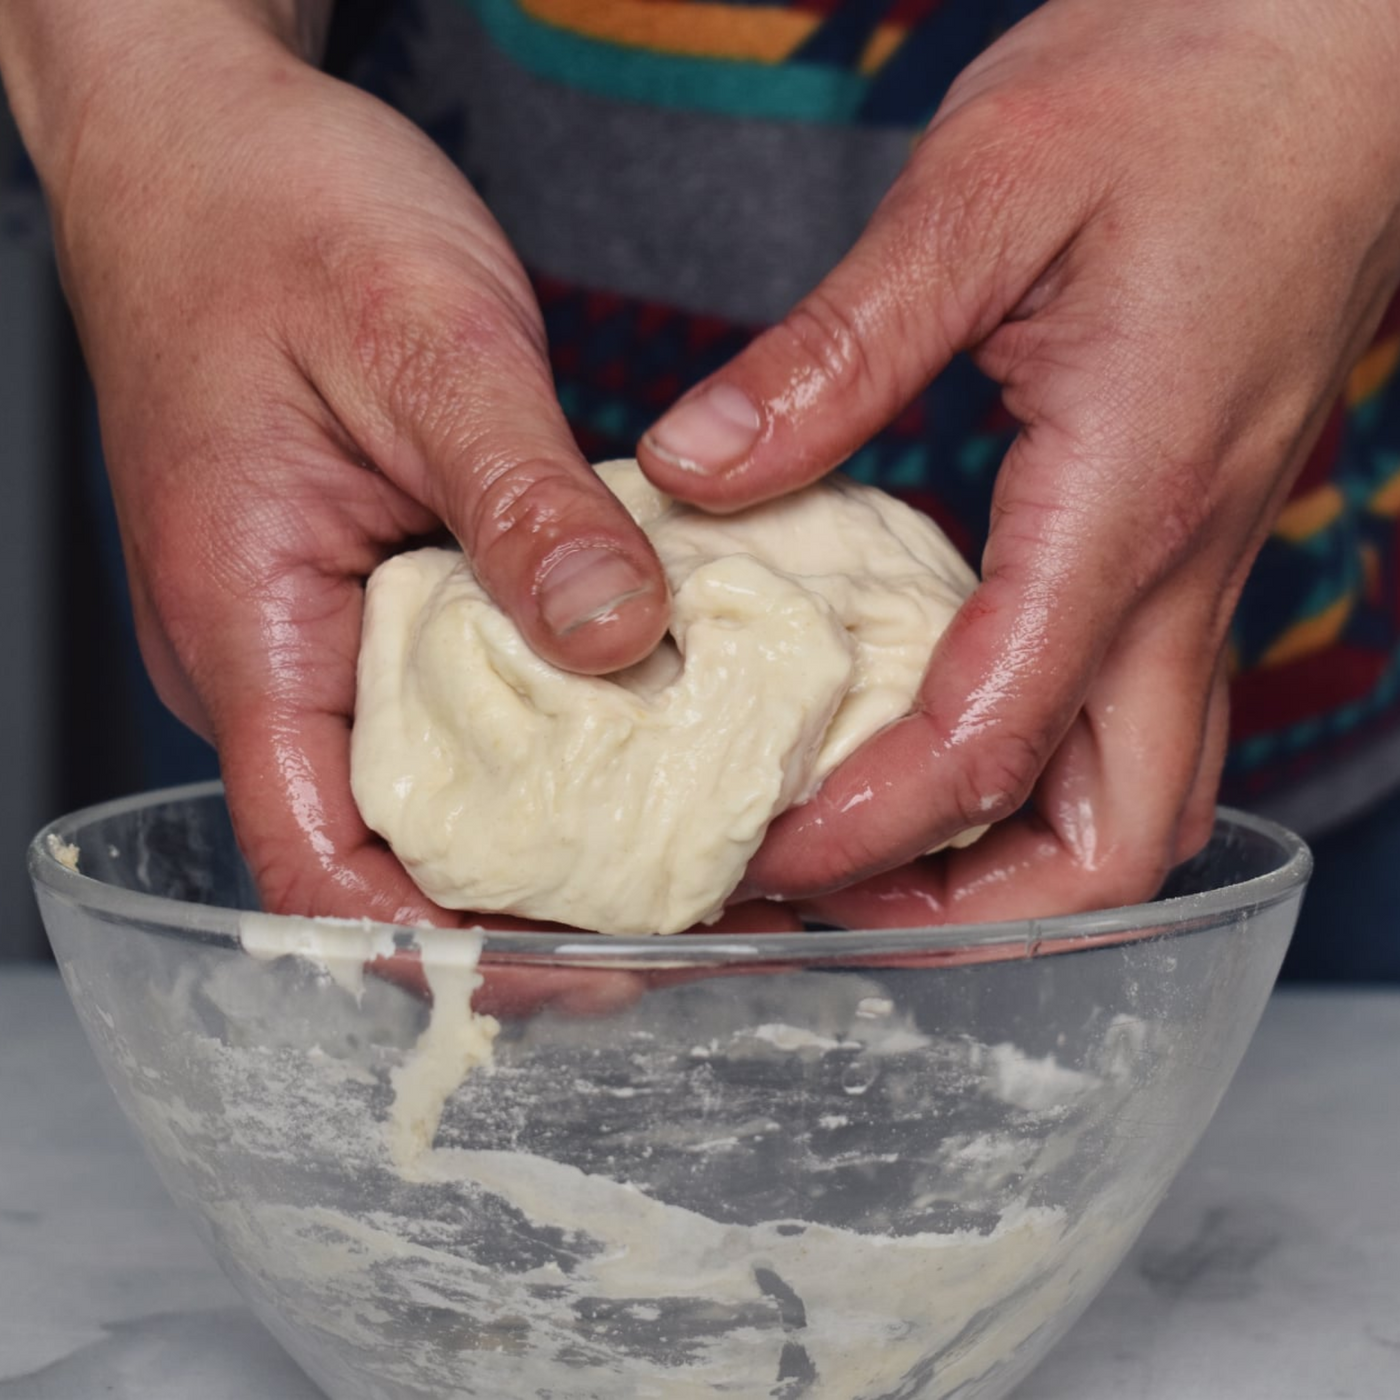 hands working with dough